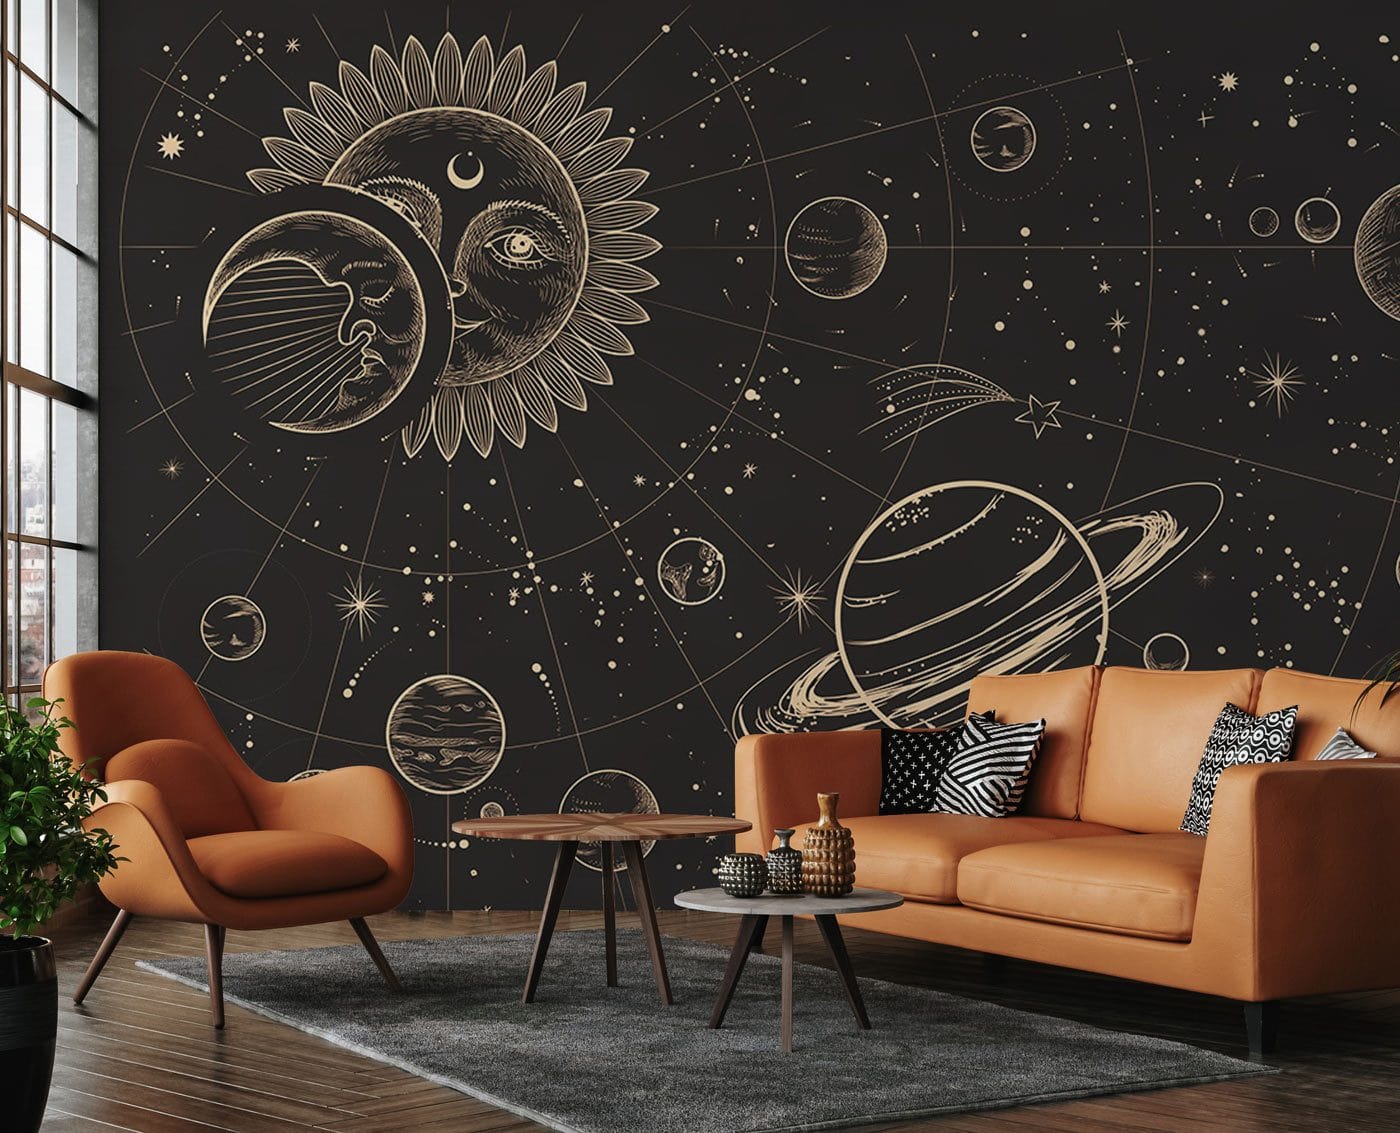 Decorative Wallpaper Mural with an Abstract Planet Pattern for the Living Room